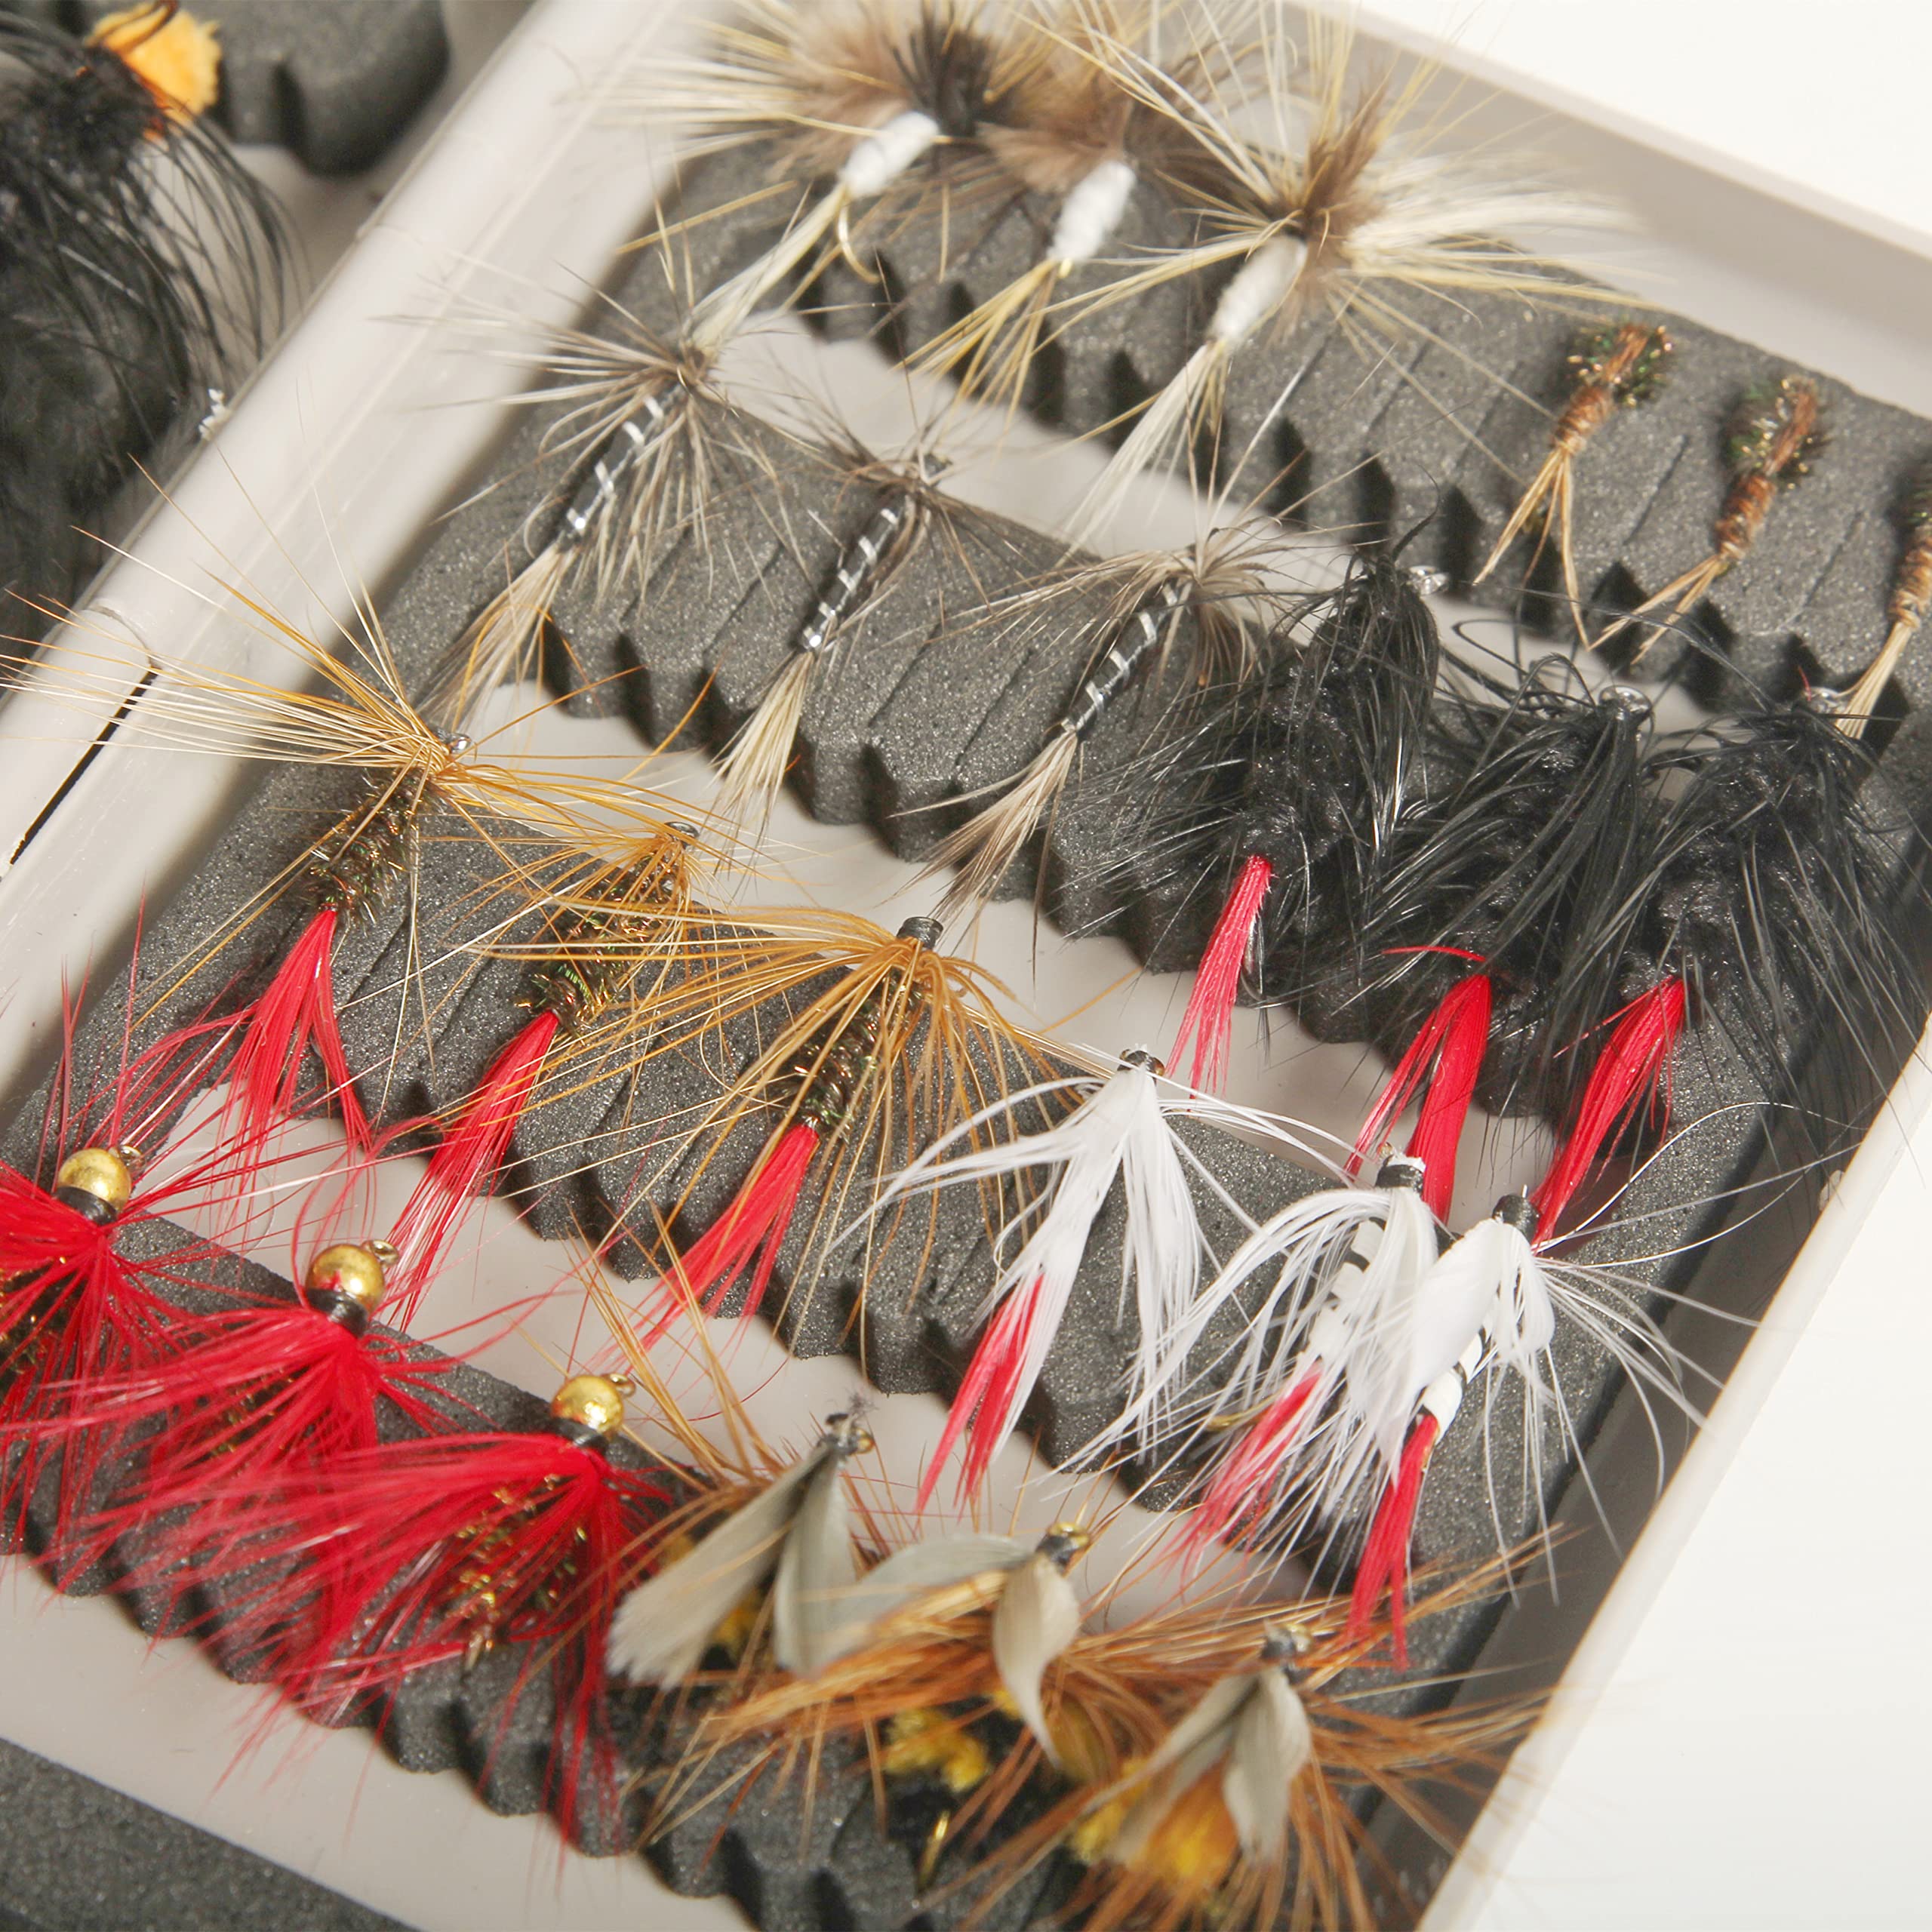 Kylebooker 75pcs Flies BASSDASH Fly Fishing Flies Kit Fly Assortment Trout  Bass Fishing with Fly Box with Dry/Wet Flies, Nymphs